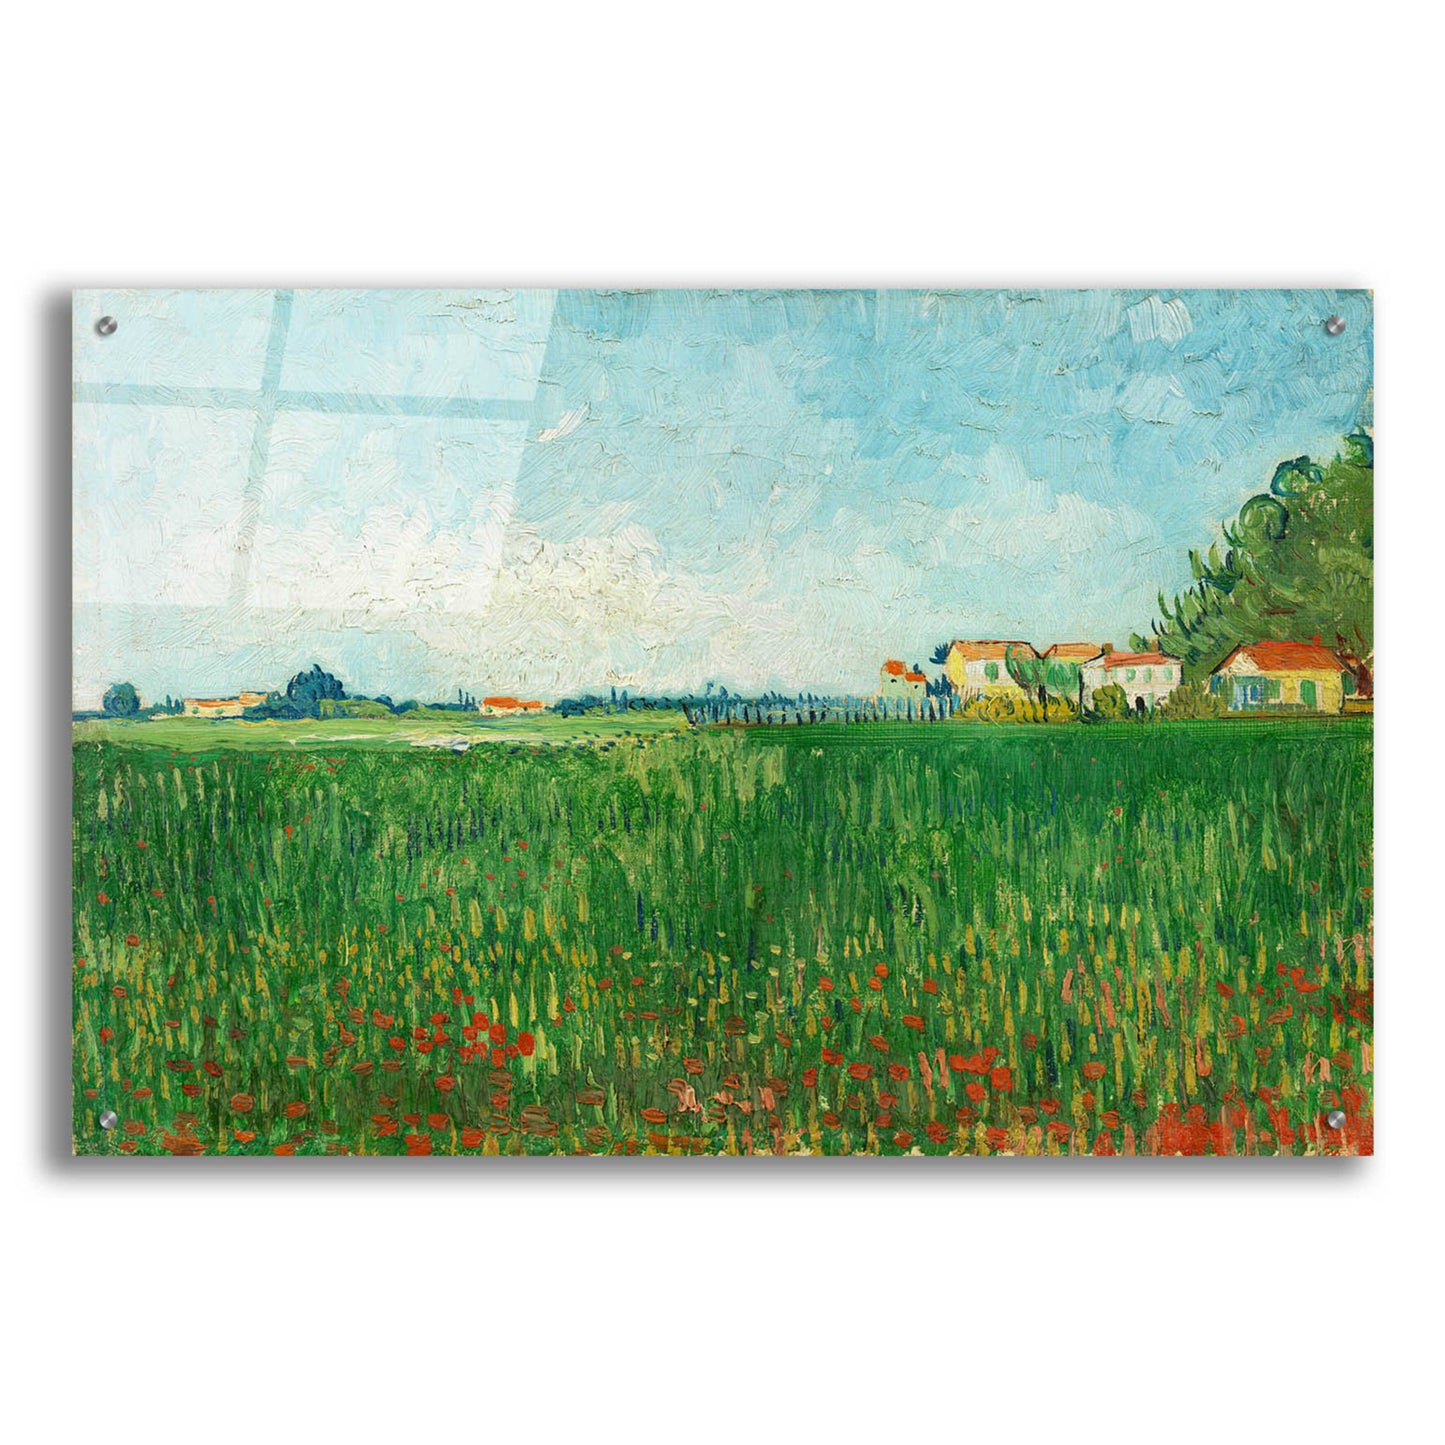 Epic Art 'Field With Poppies' by Vincent Van Gogh, Acrylic Glass Wall Art,36x24